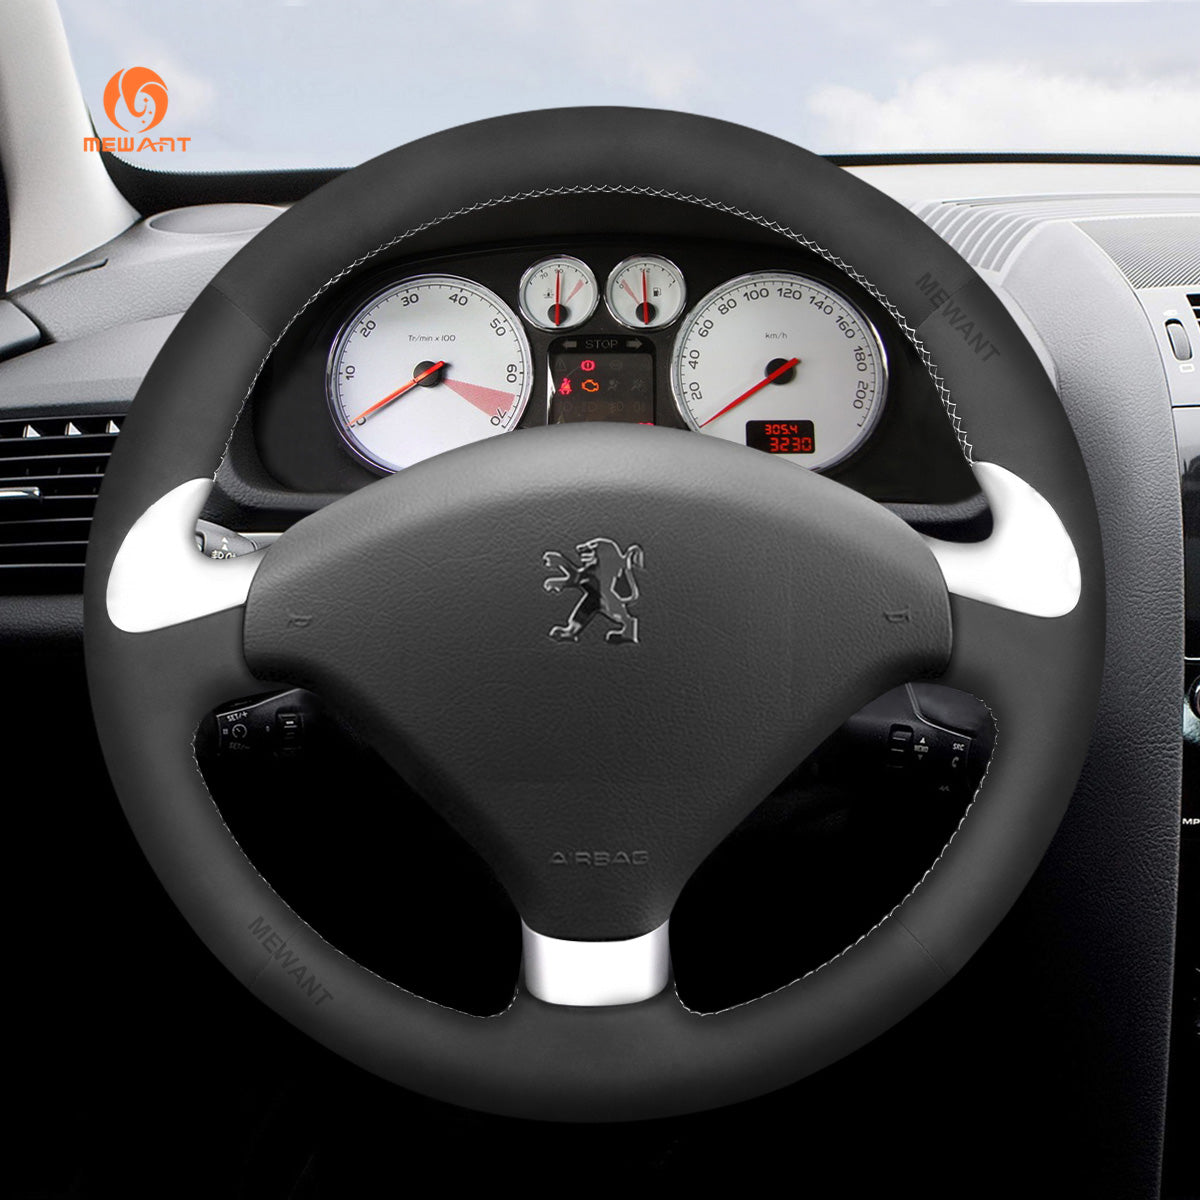 MEWANT Black Suede Car Steering Wheel Cover for Peugeot 307 CC 2004-2007